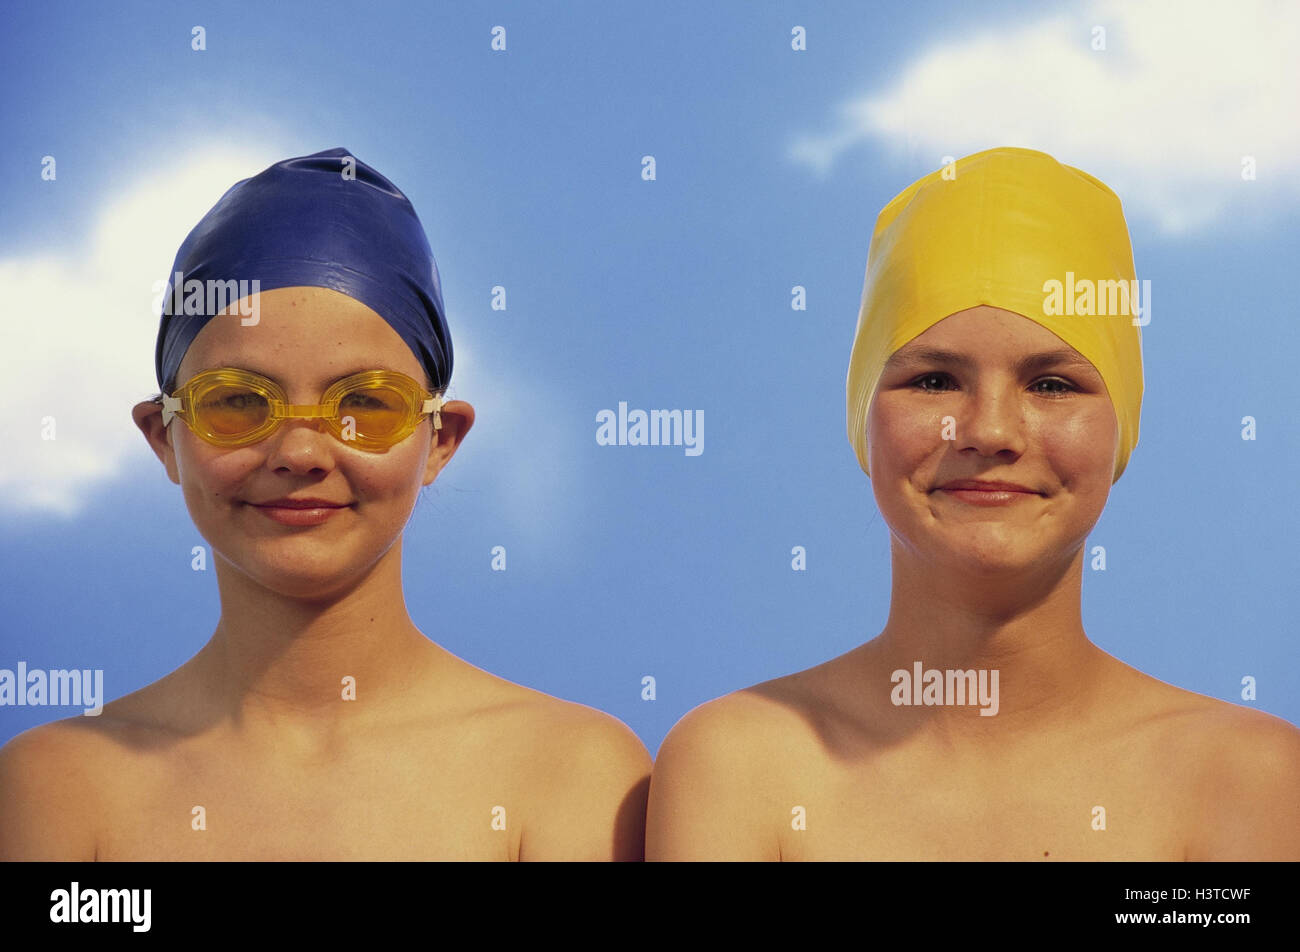 Girls, bathing caps, grin, portrait, outside, summer, children, two, friends, 8 years, 10-15 years, swimwear, swimming glasses, happy, free upper part of the Body, leisure time, childhood, happy, funnily, amuses, expression, studio, outdoor swimming pool, Stock Photo